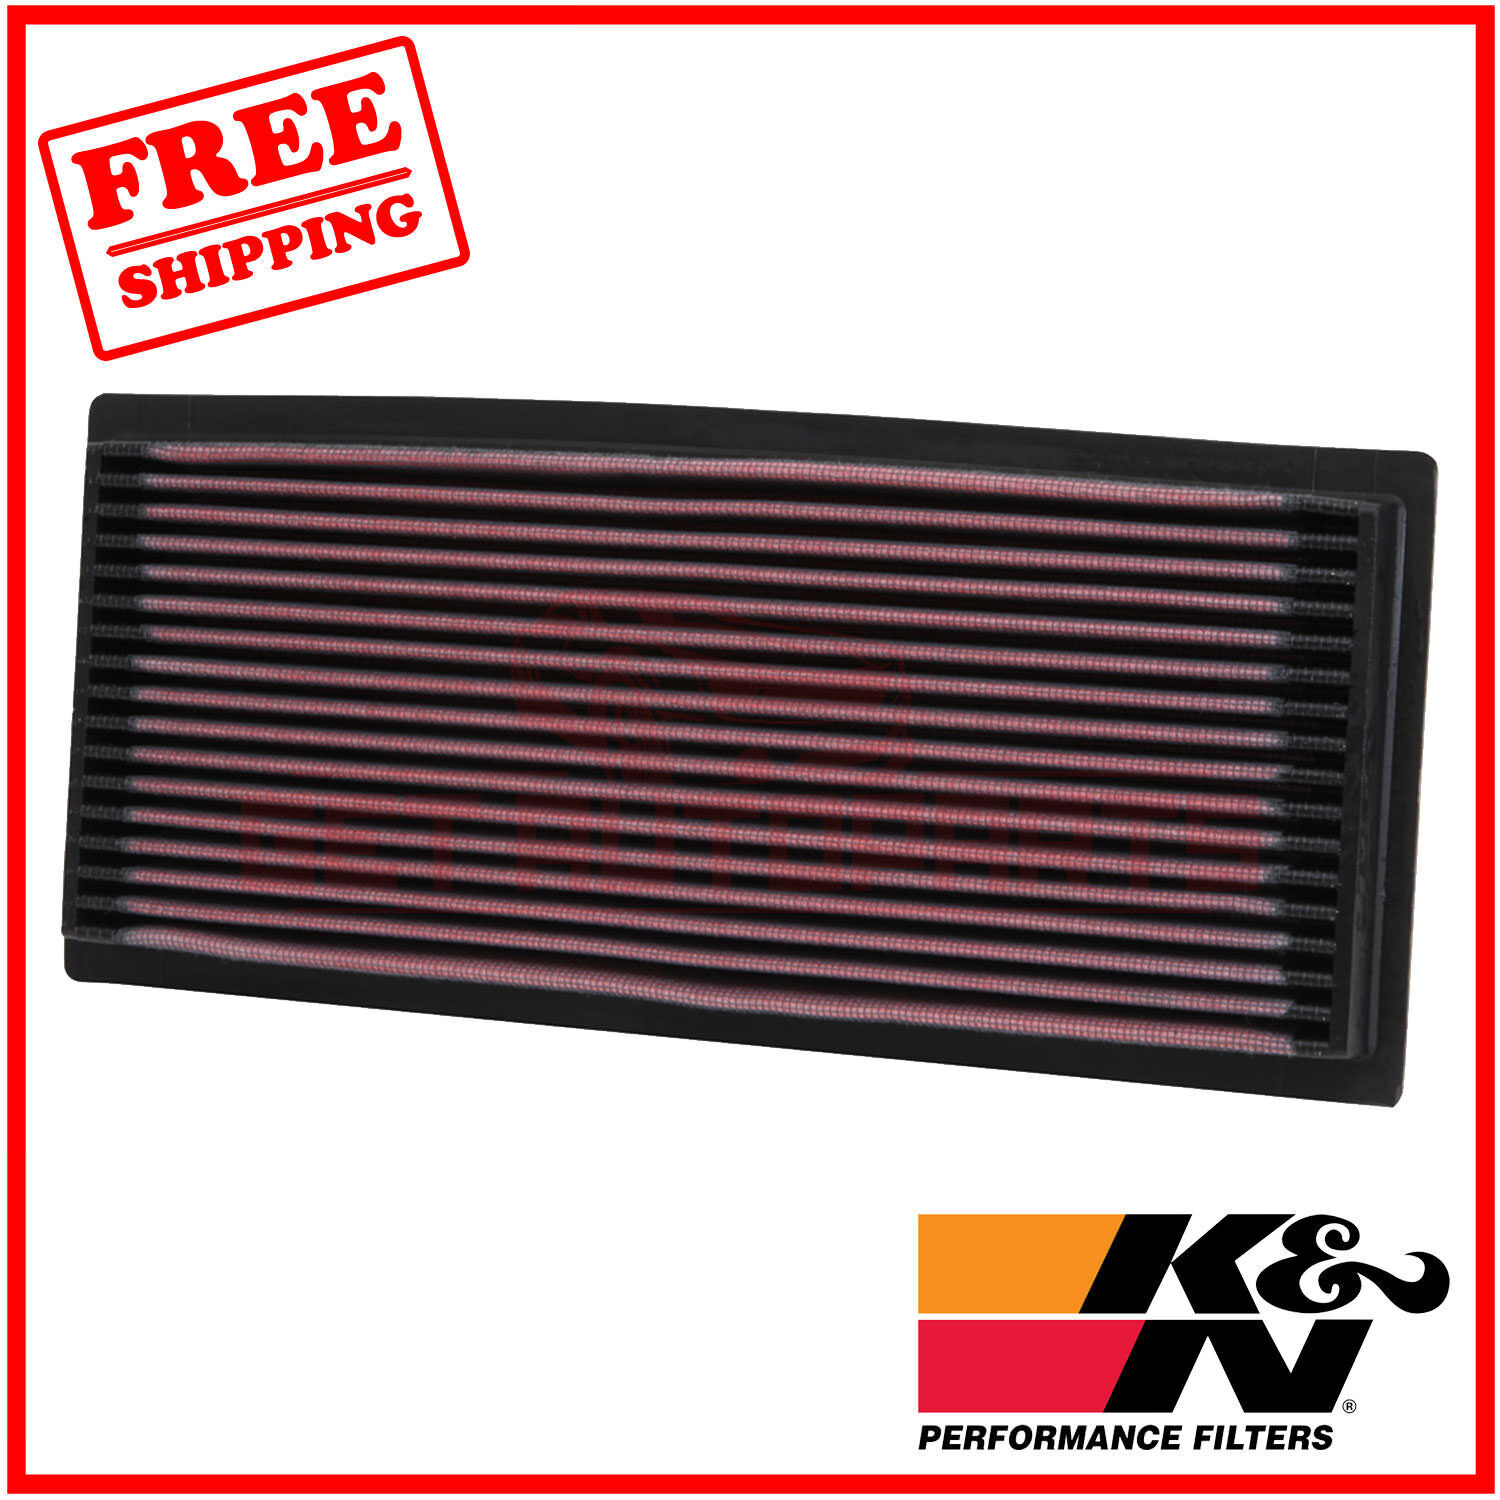 K&N Replacement Air Filter for Dodge Viper 1992-2002